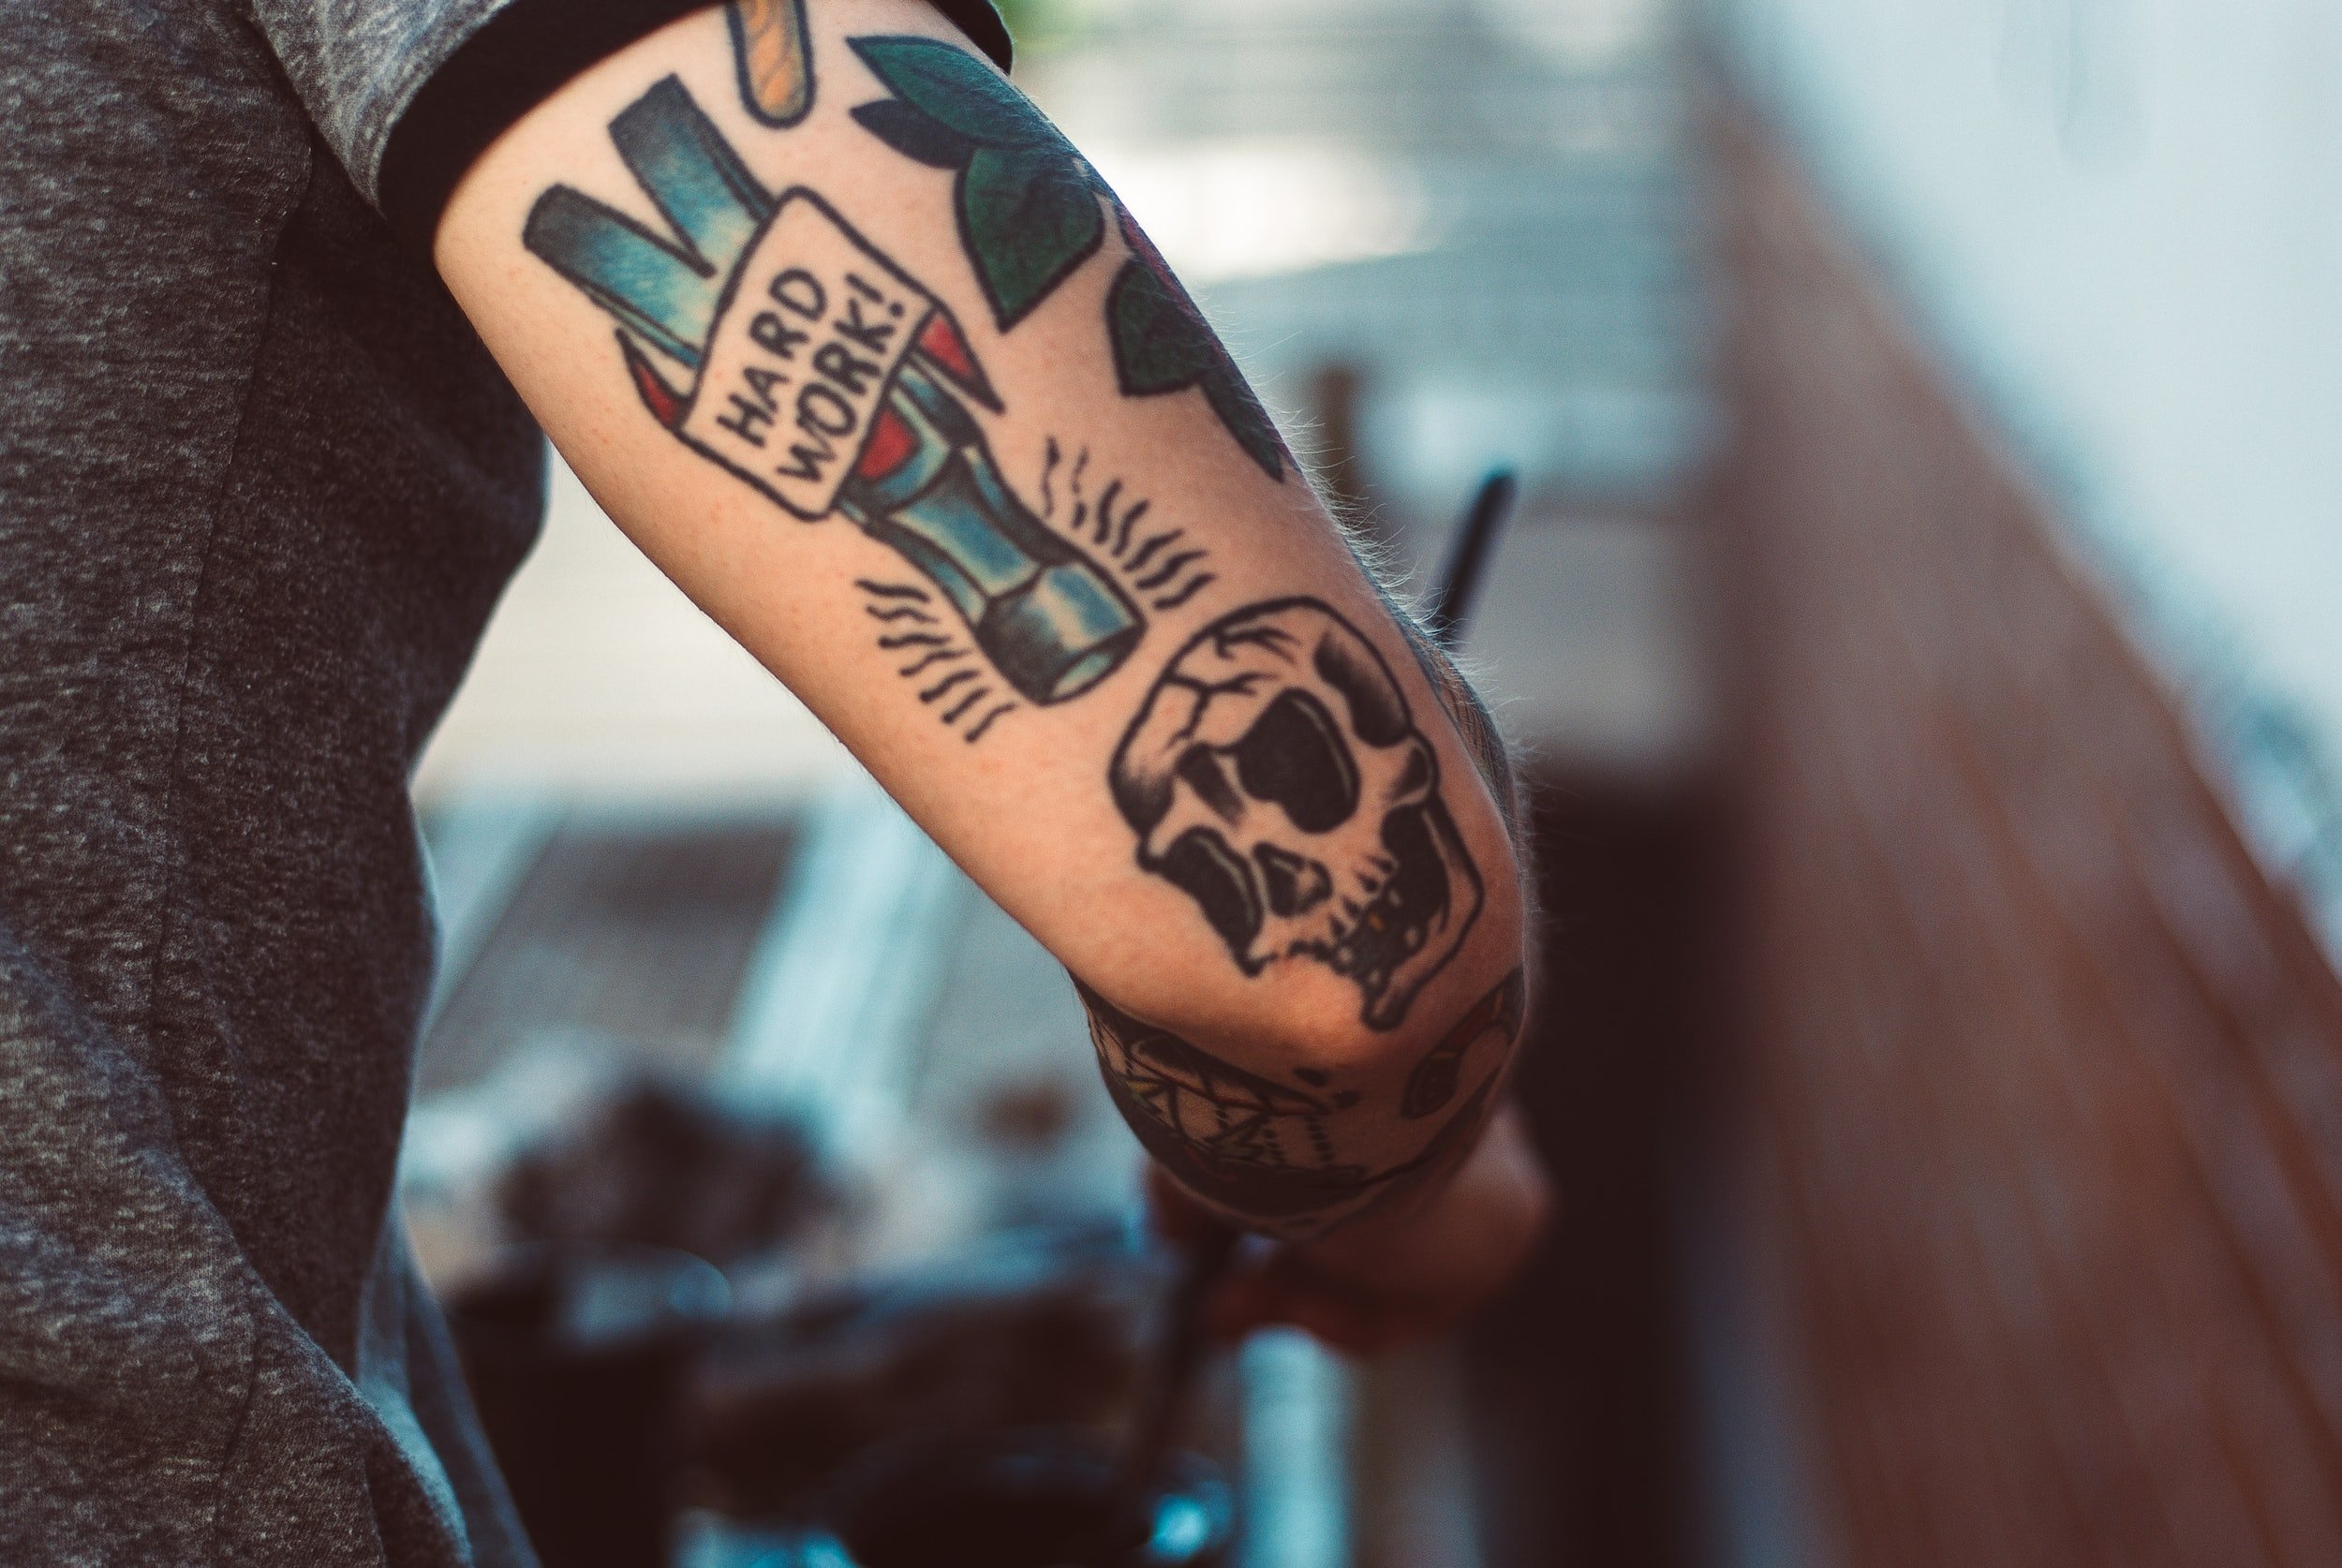 Can Teachers Have Tattoos The Pros and Cons